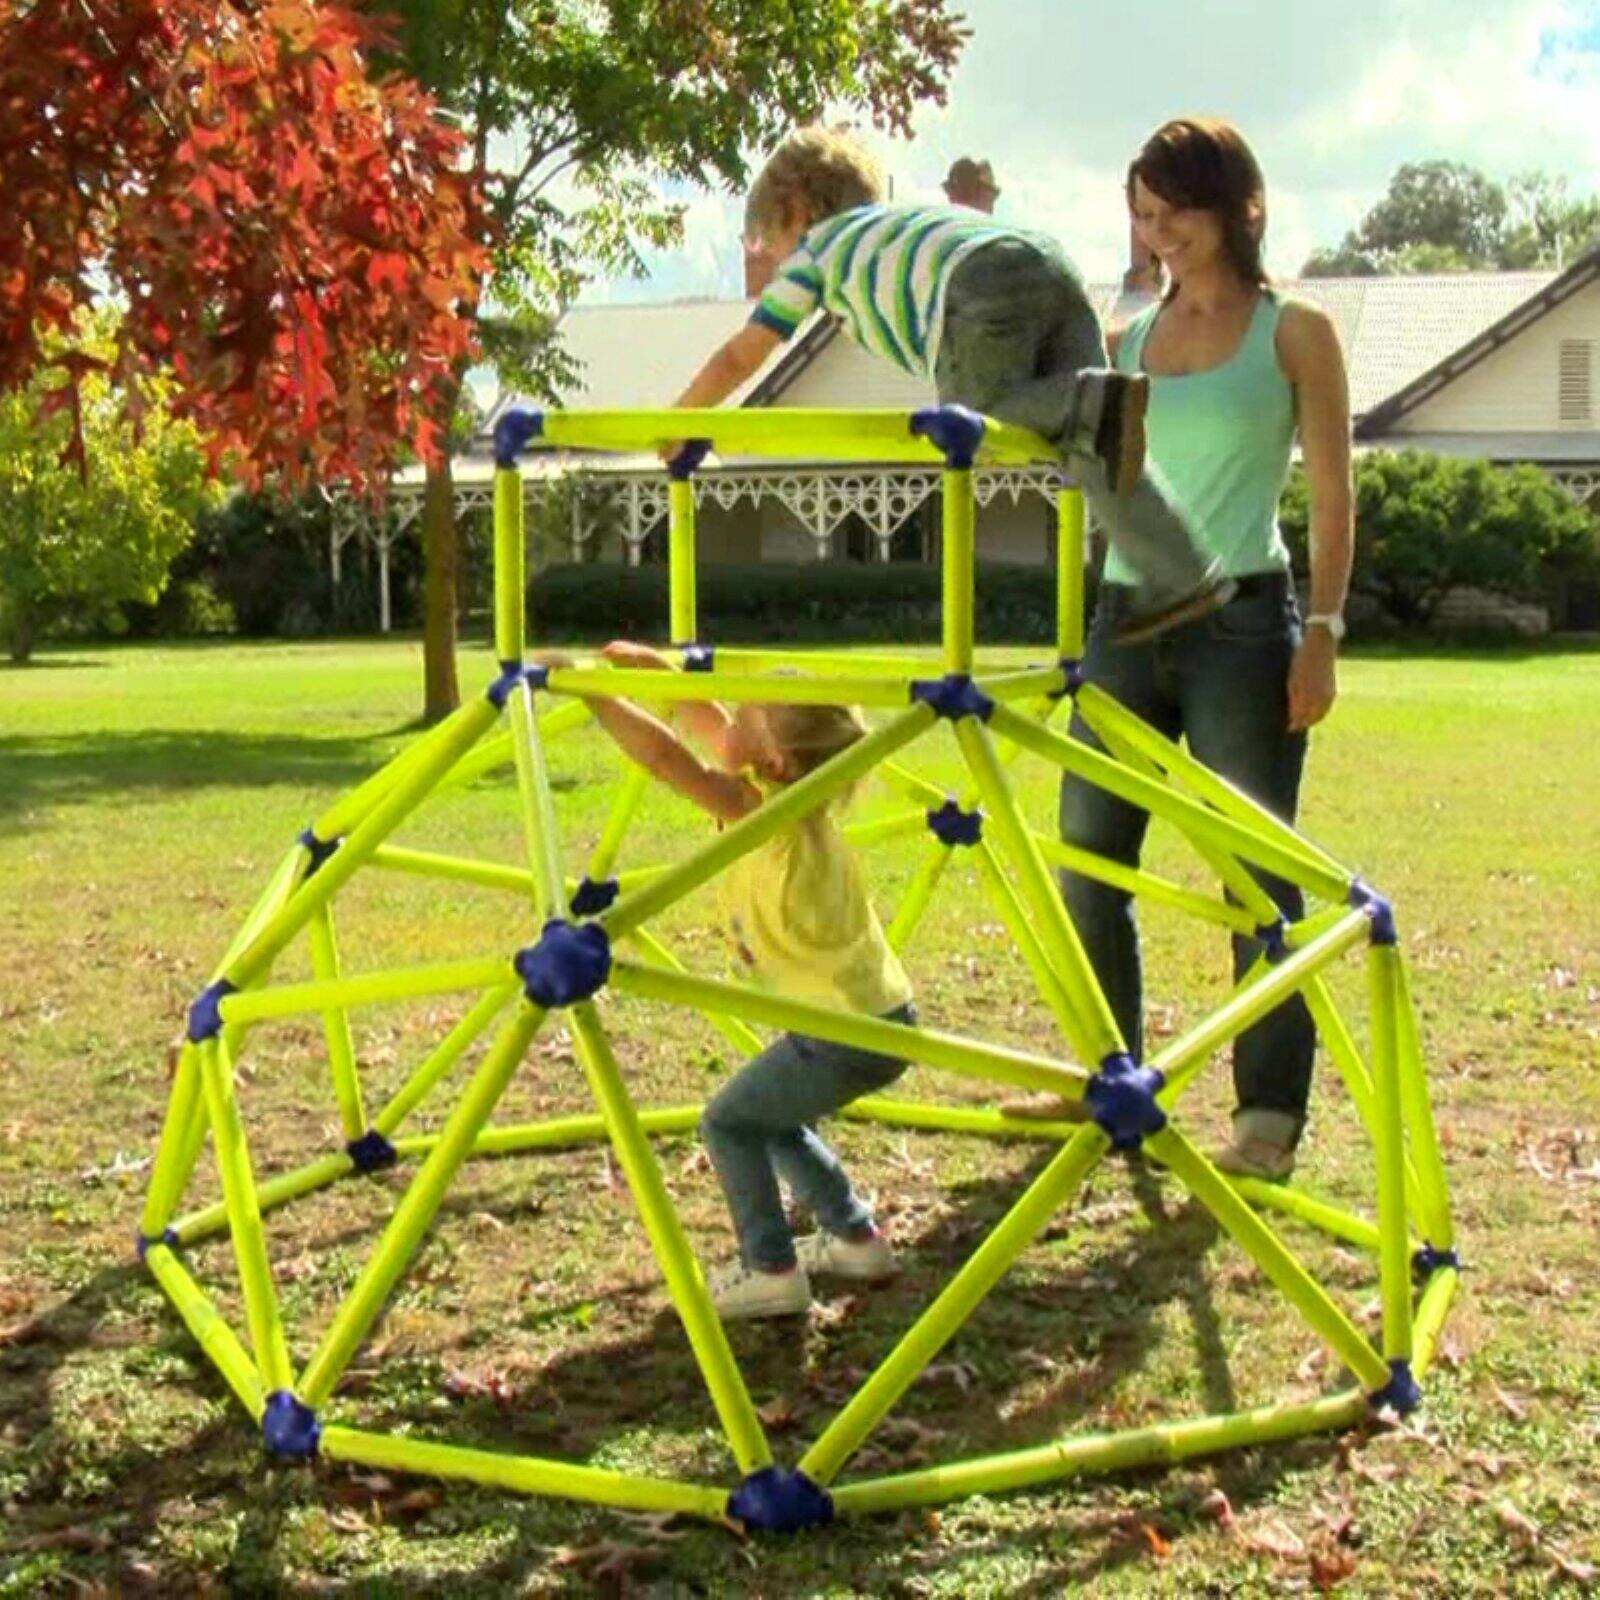 Eezy Peezy Monkey Bars Climbing Tower - Active Outdoor Fun for Kids Ages 3 to 8 Years Old, Green/Blue - image 3 of 3